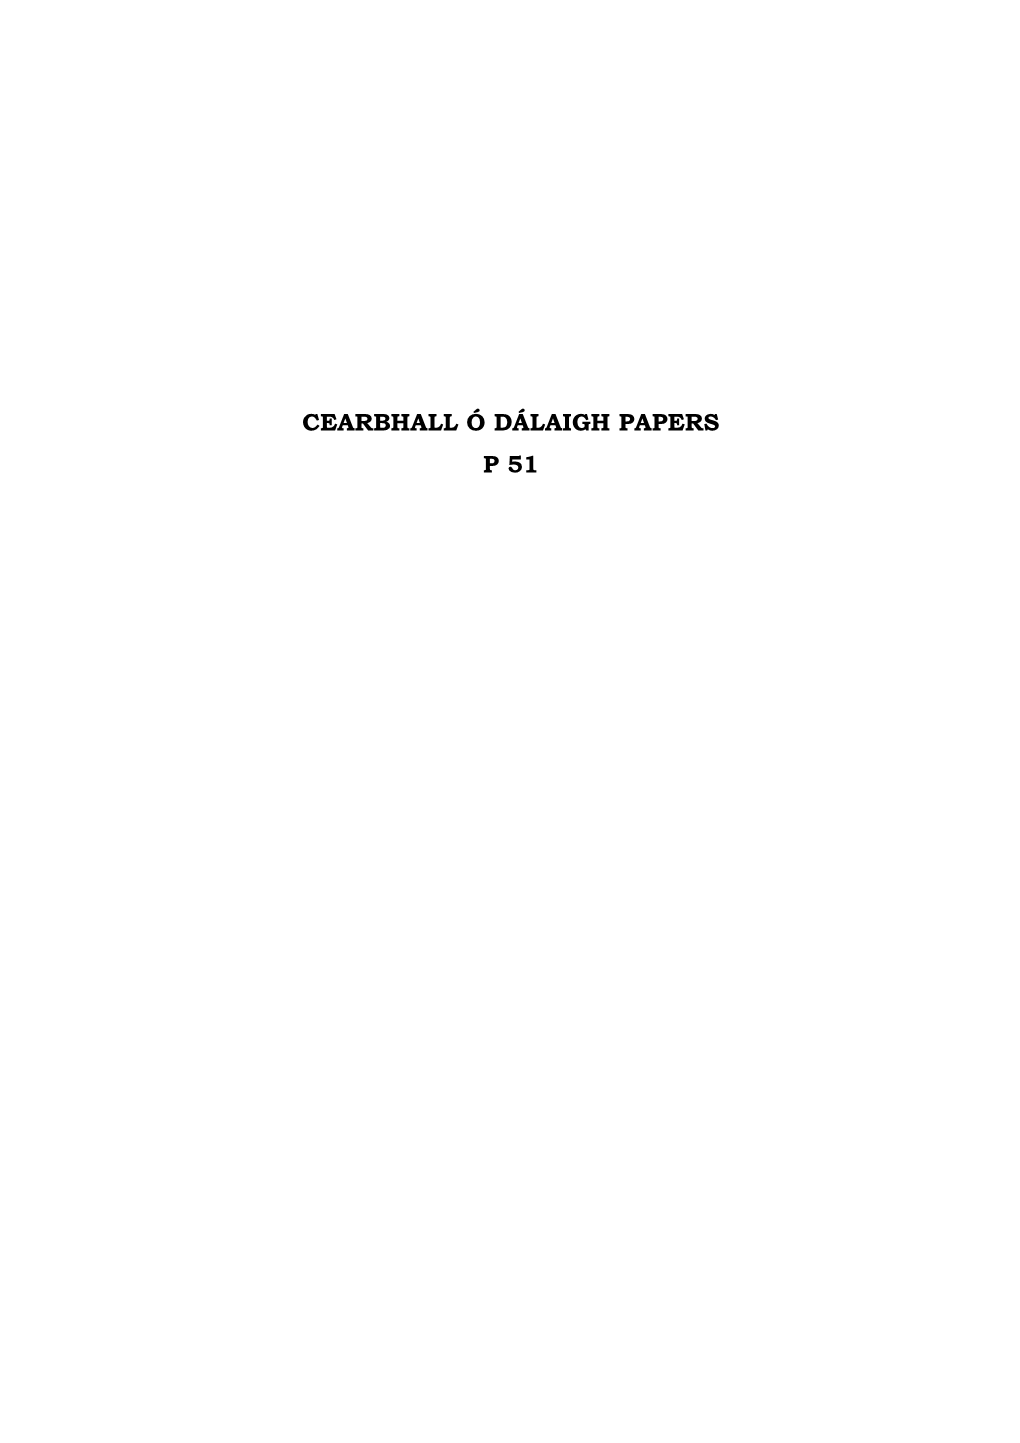 CEARBHALL Ó DÁLAIGH PAPERS P 51 Introductory Note